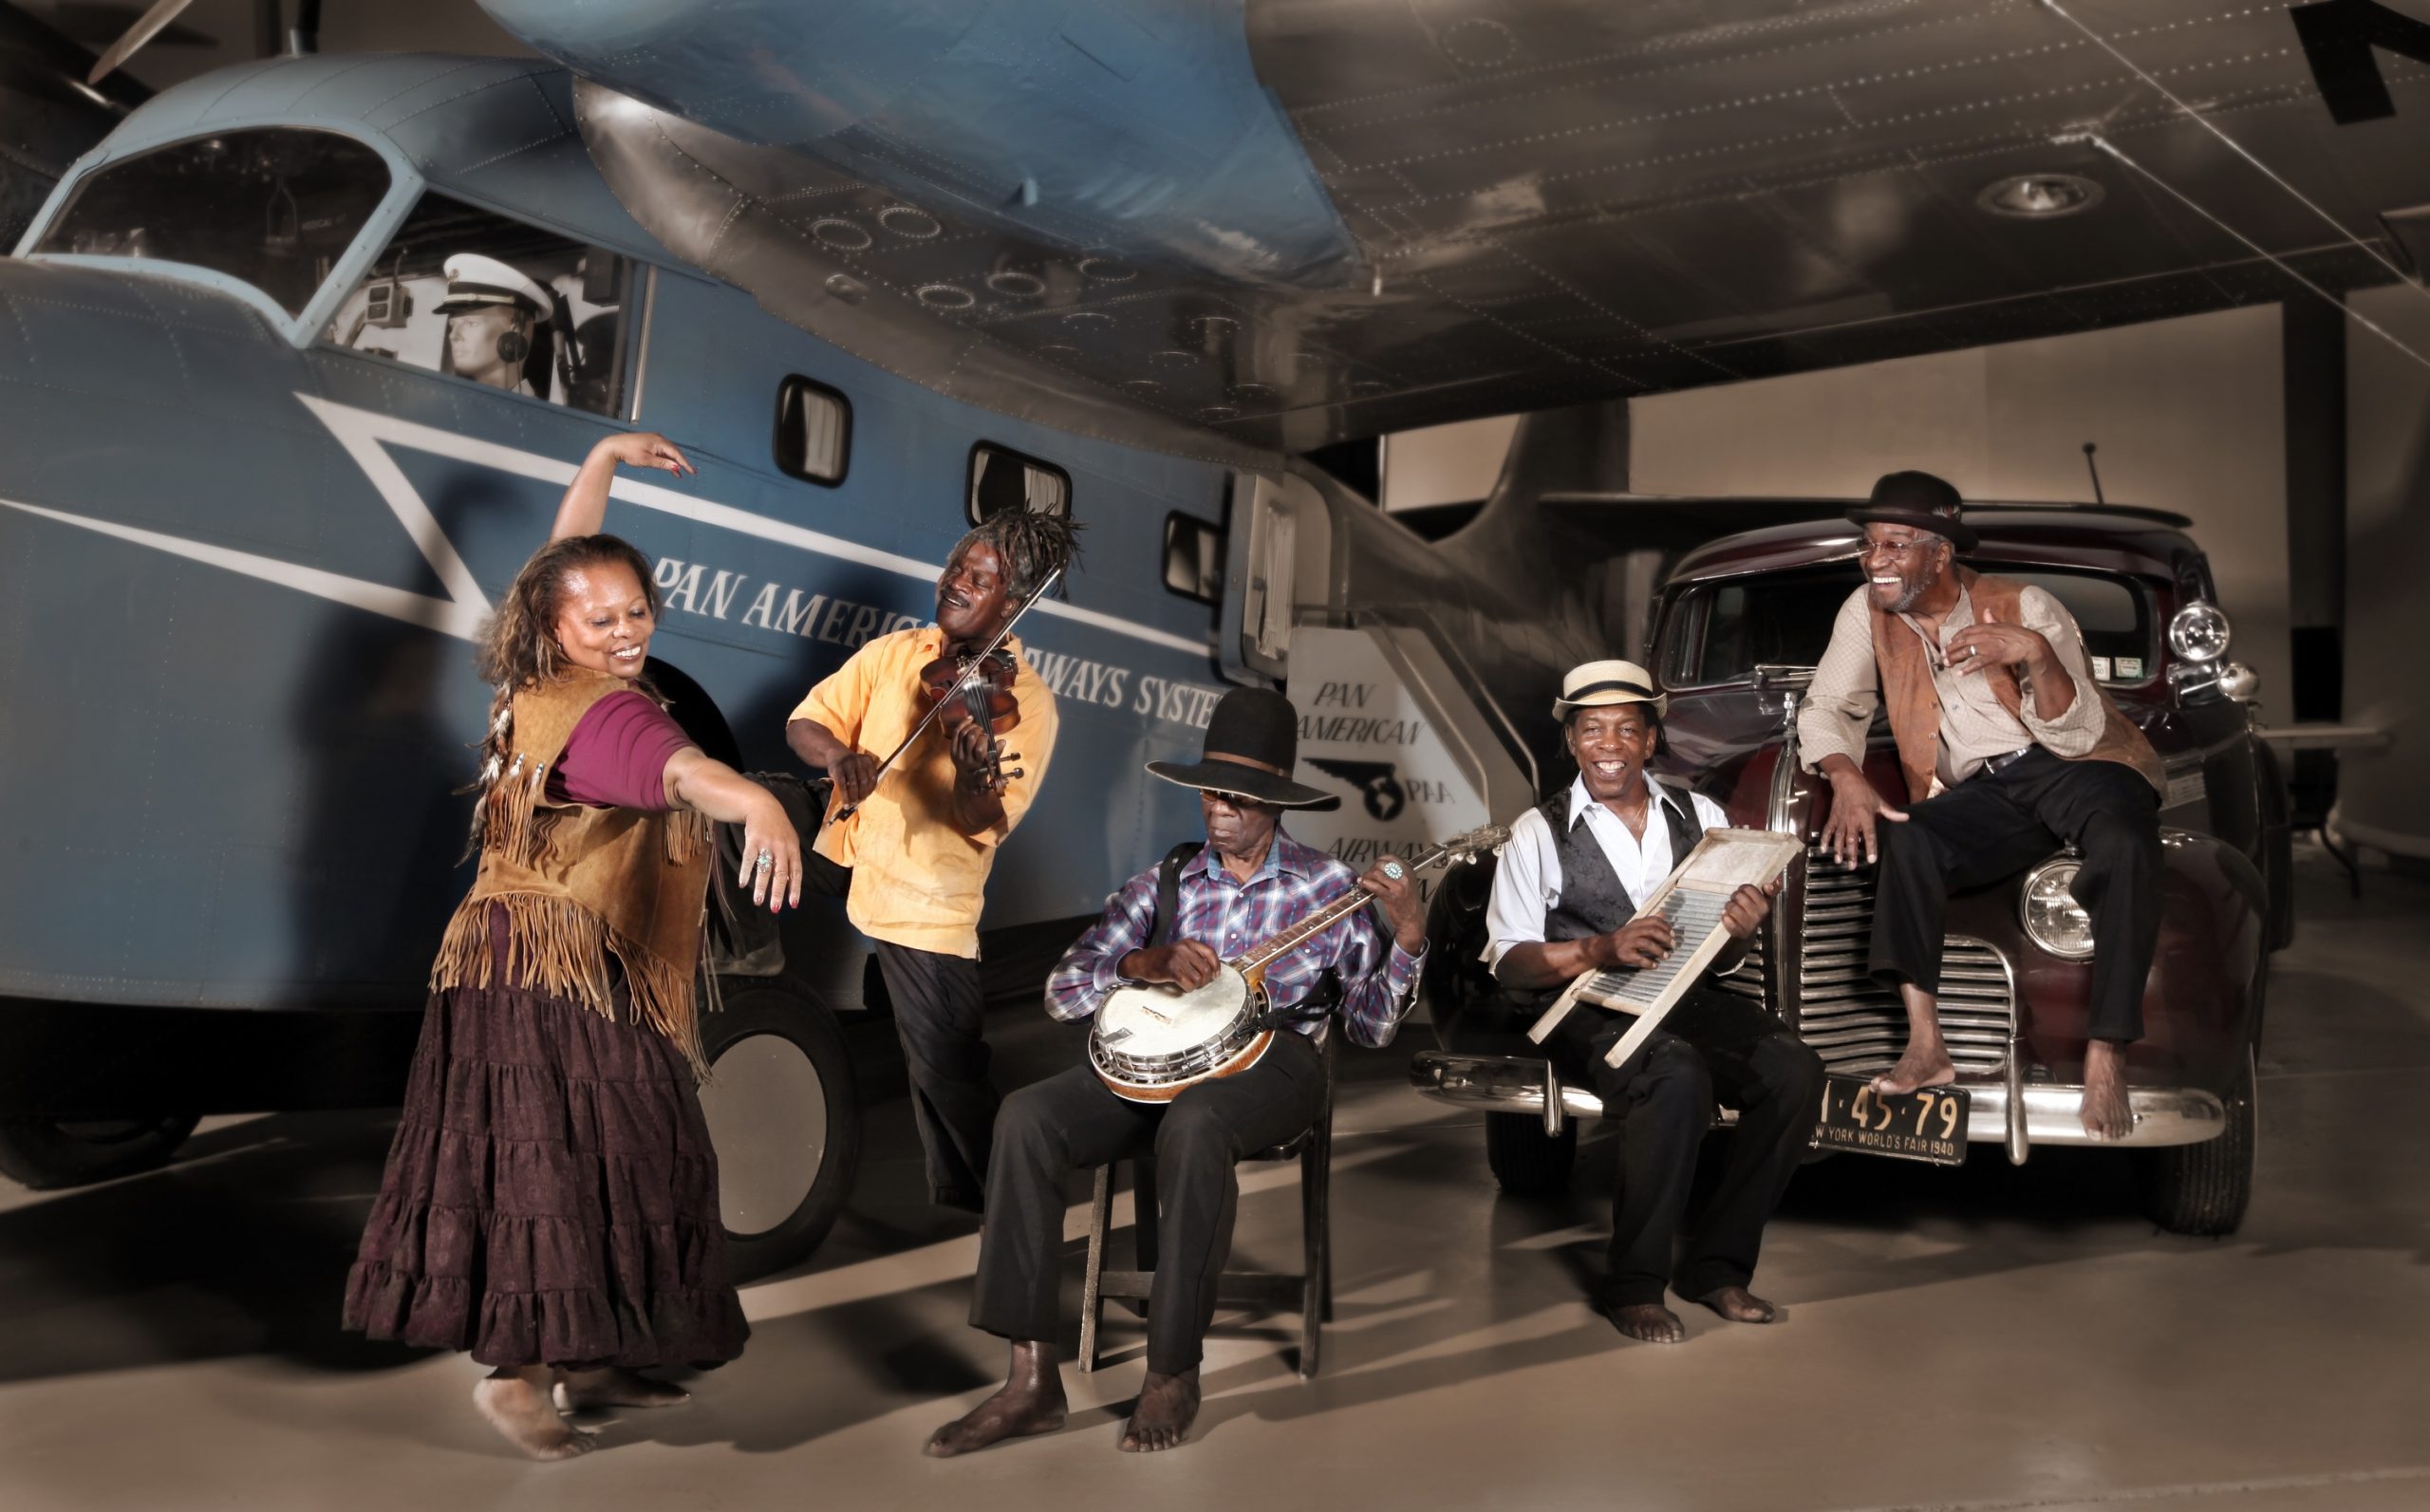 The Ebony Hillbillies: Becoming a Part of the Music